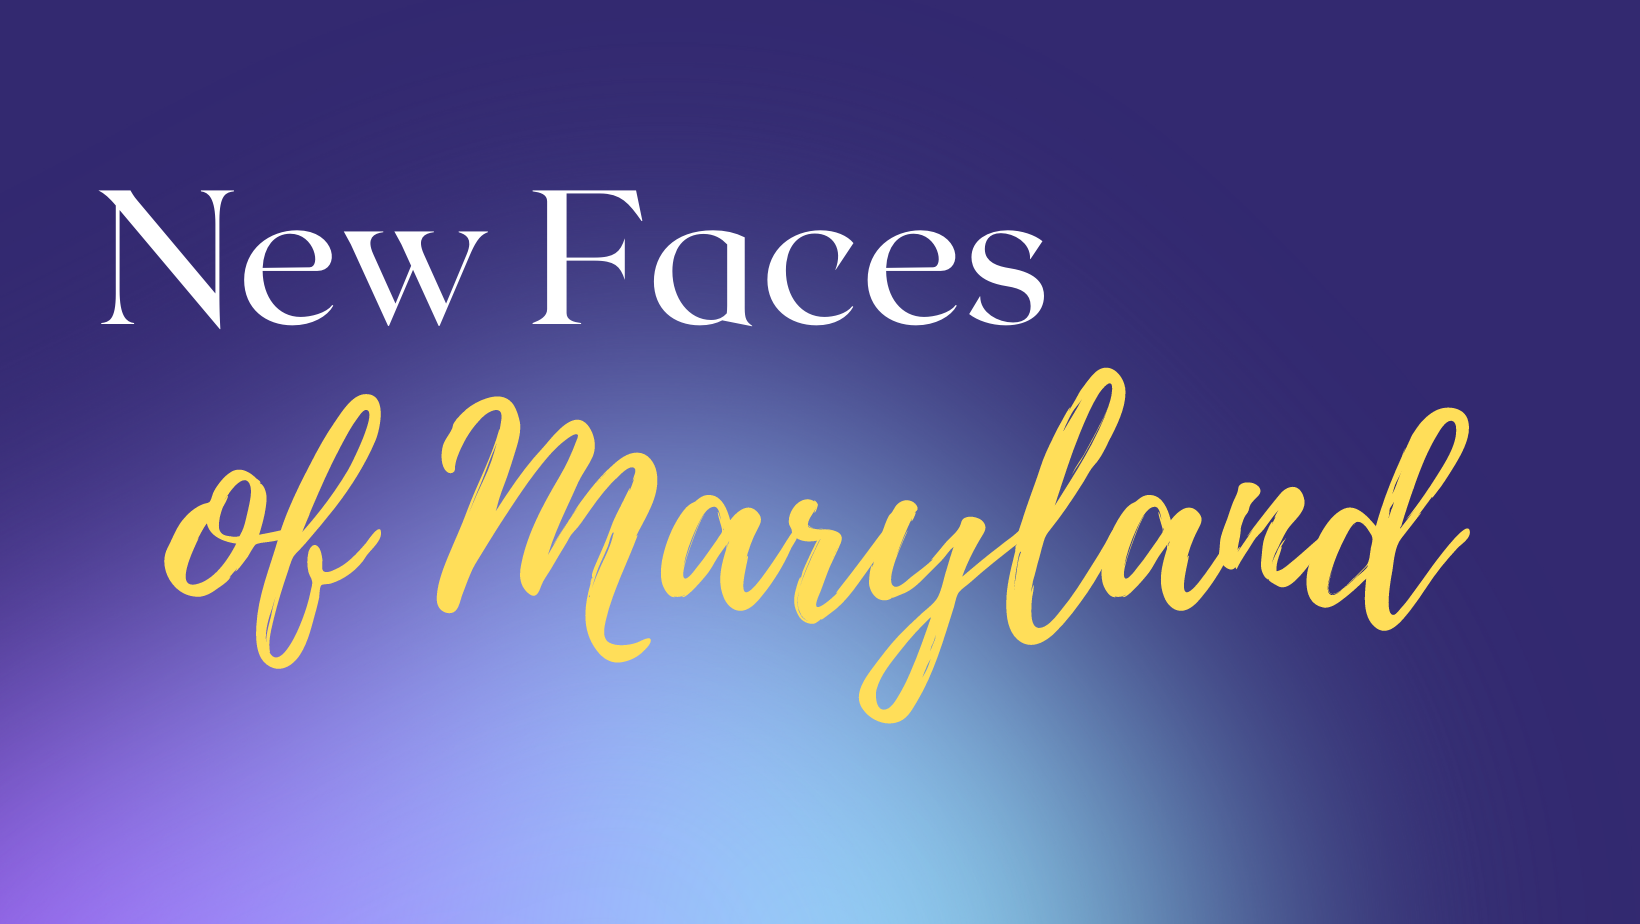 New Faces of Maryland